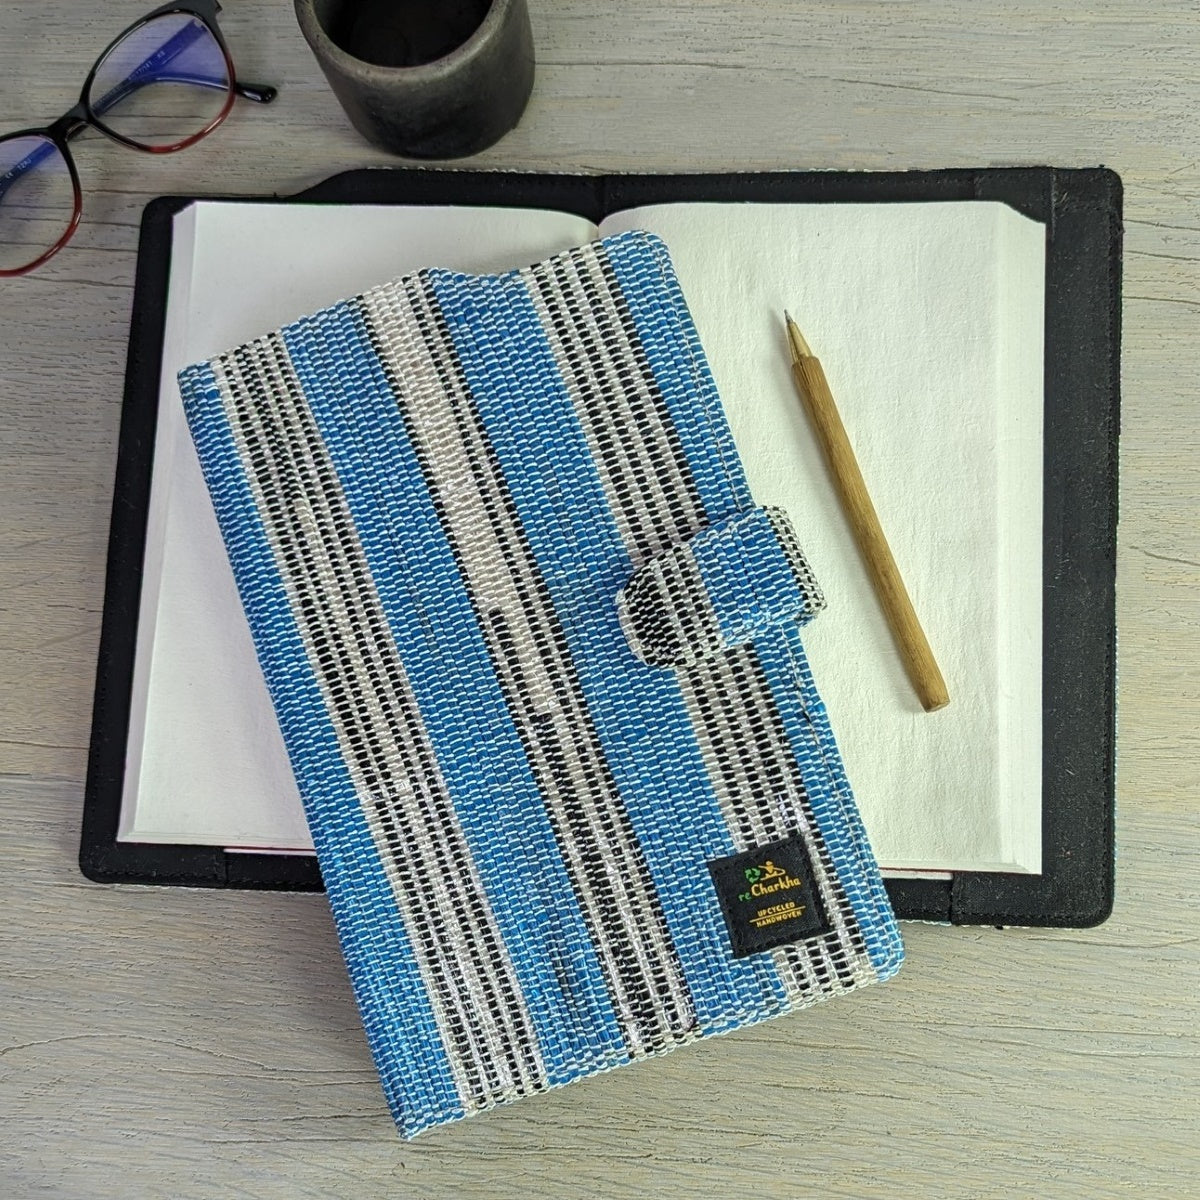 (EDC0224-100) Blue and Black White Stripes Upcycled Handwoven Executive Diary Cover